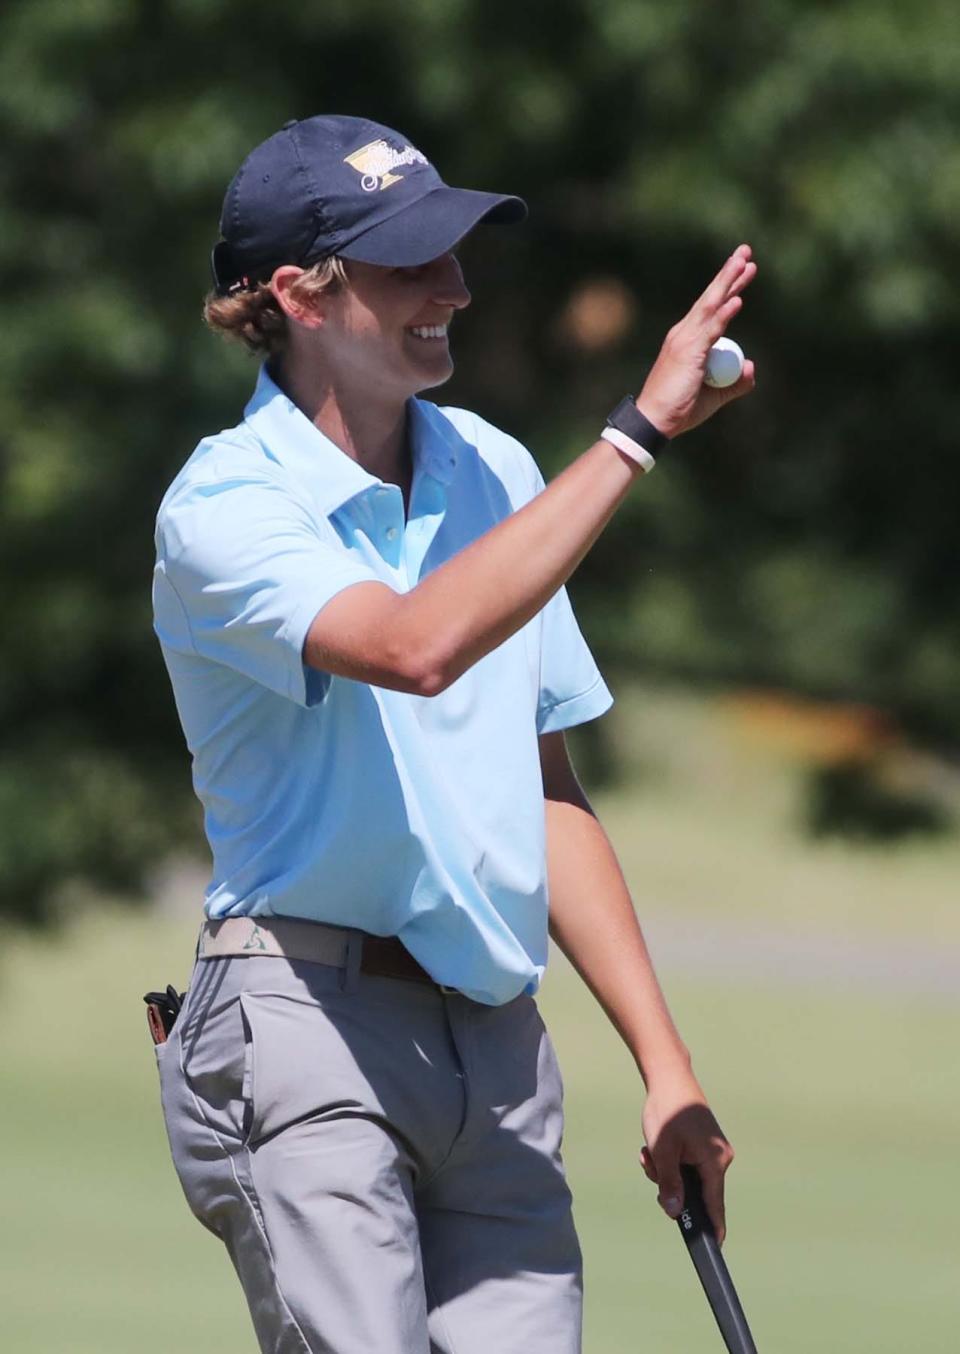 Brett Podobinski of Dublin waves to fans after sinking a putt on the 18th hole during the Hudson Junior Golf Tournament at the Country Club of Hudson Thursday. He finished the tournament tied for second place.